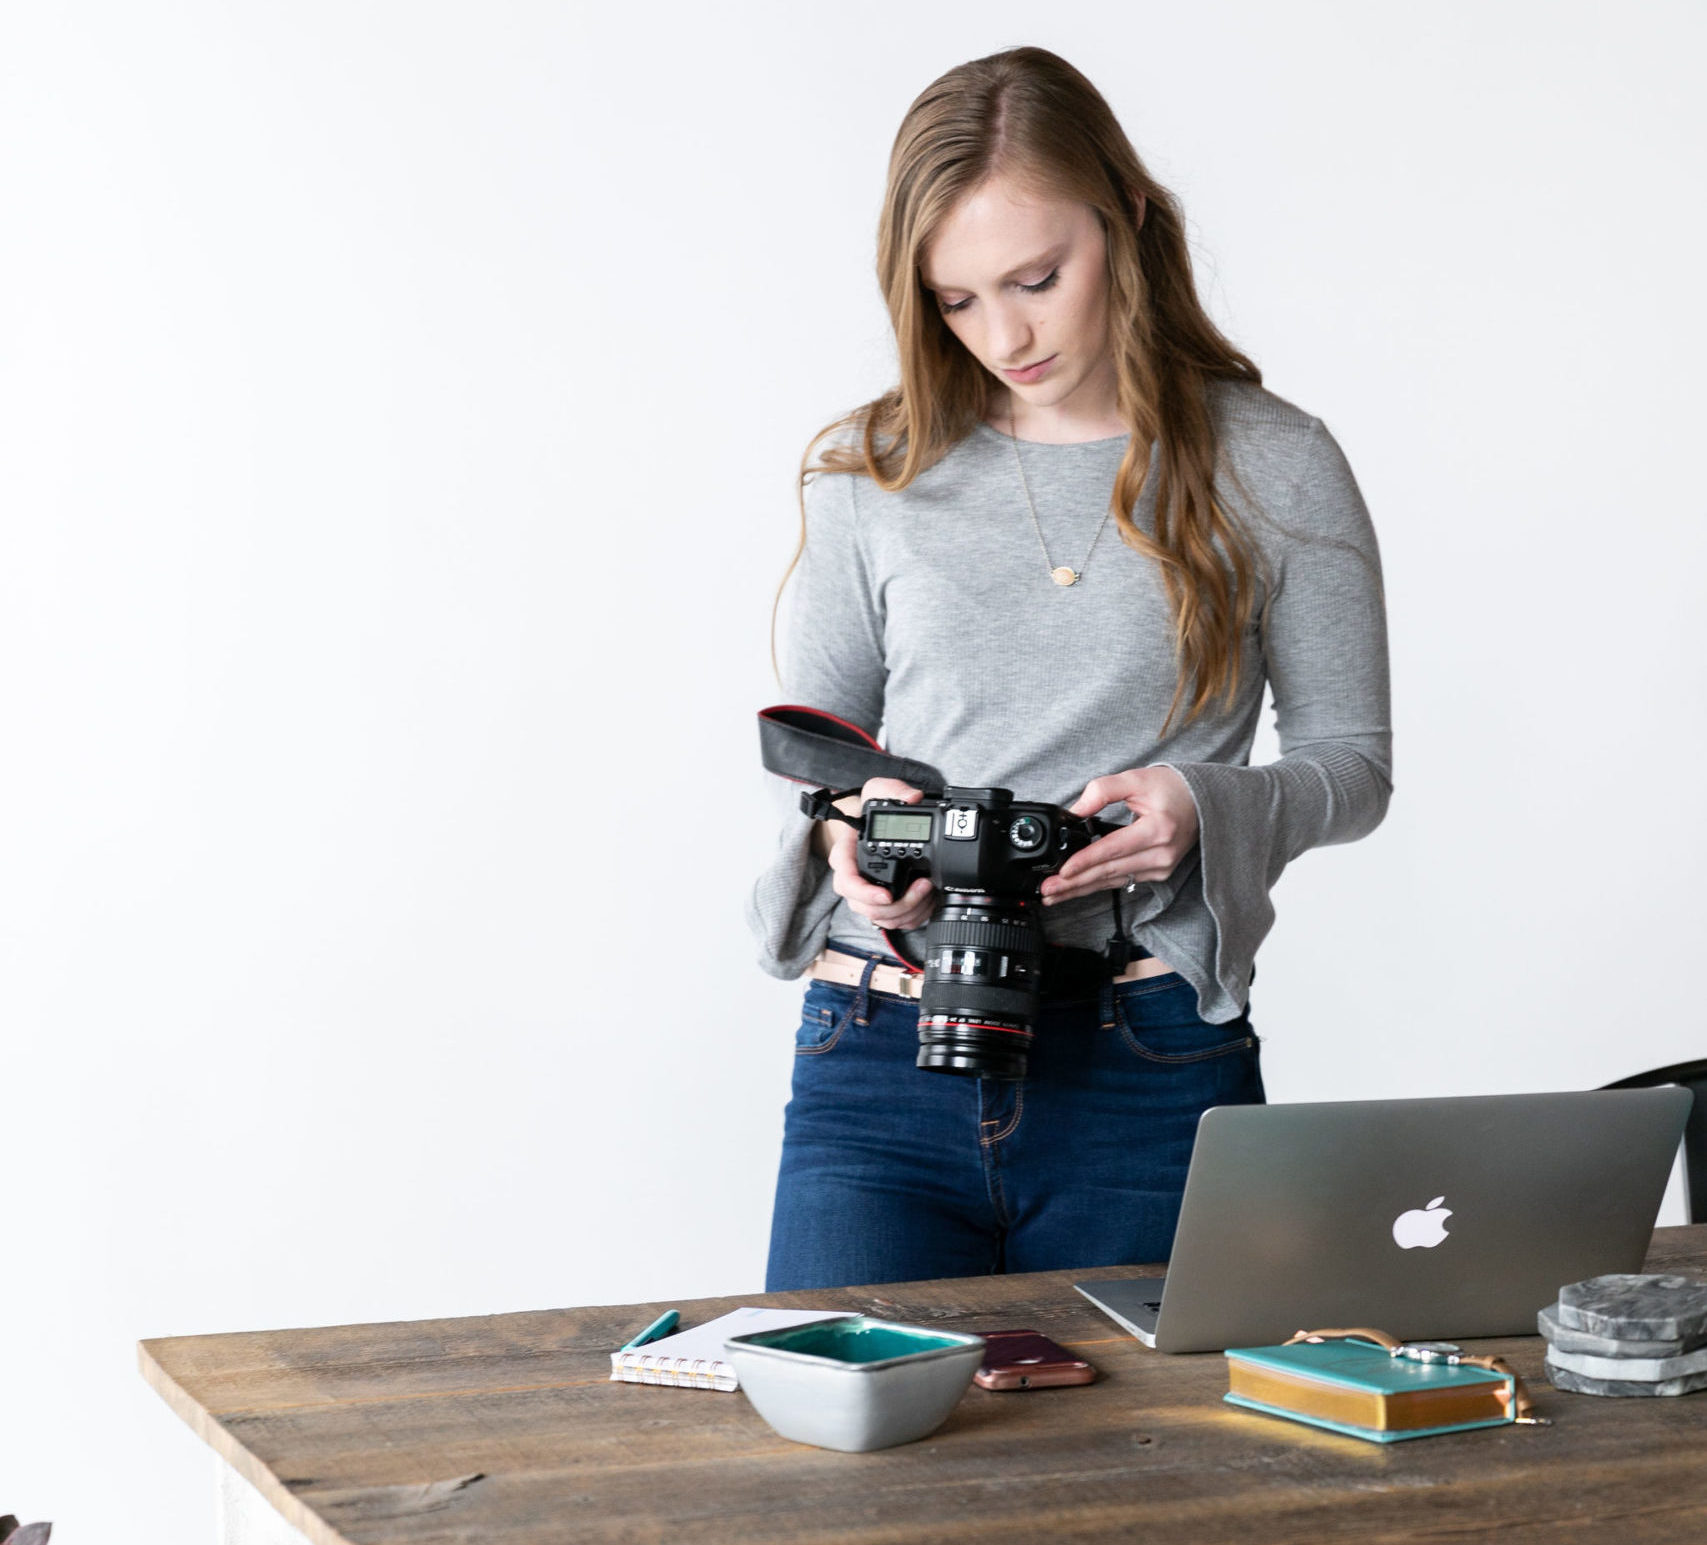 Woman in a gray shirt stands over a desk with a DSLR camera